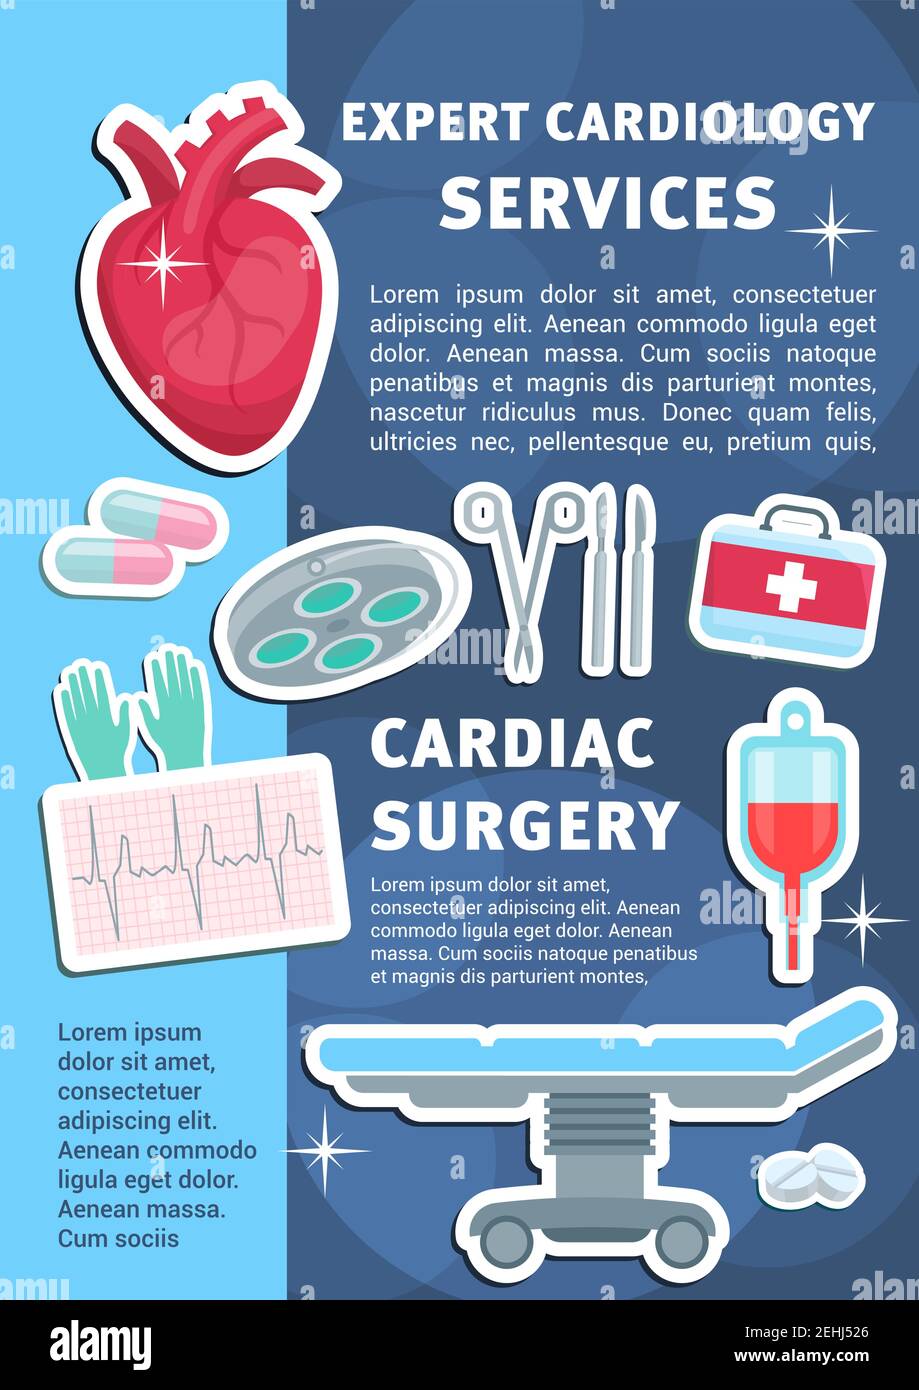 Cardiology medicine poster for heart health clinic and medical surgery. Vector design of cardiologist operating table, blood dropper or syringe and tr Stock Vector